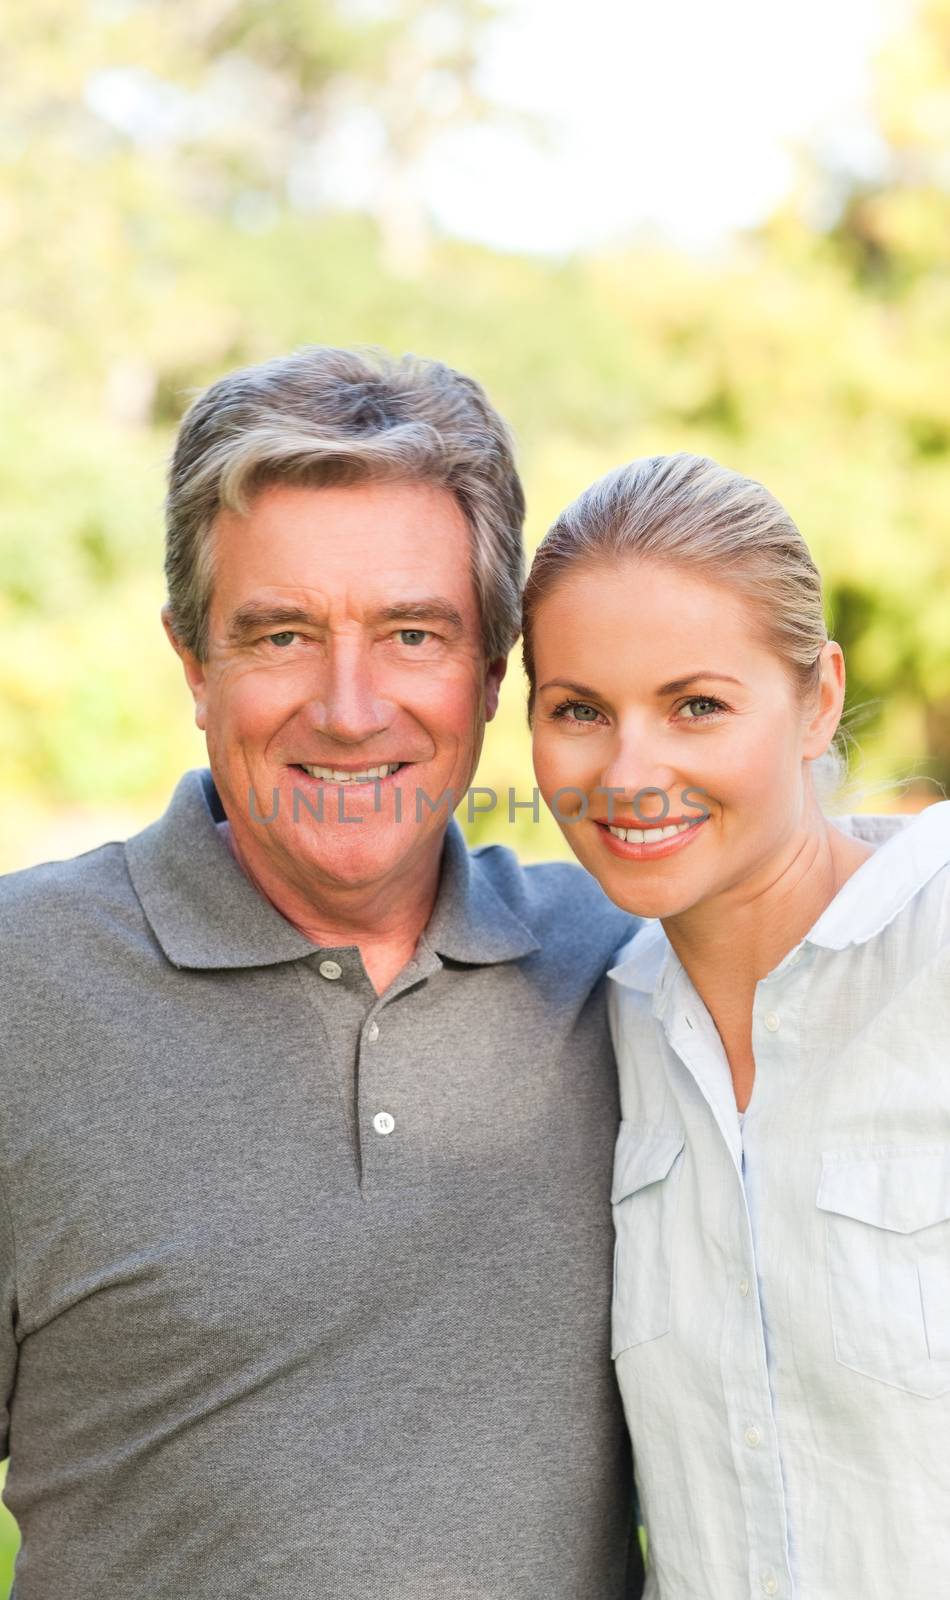 Woman with her fatherin-law by Wavebreakmedia